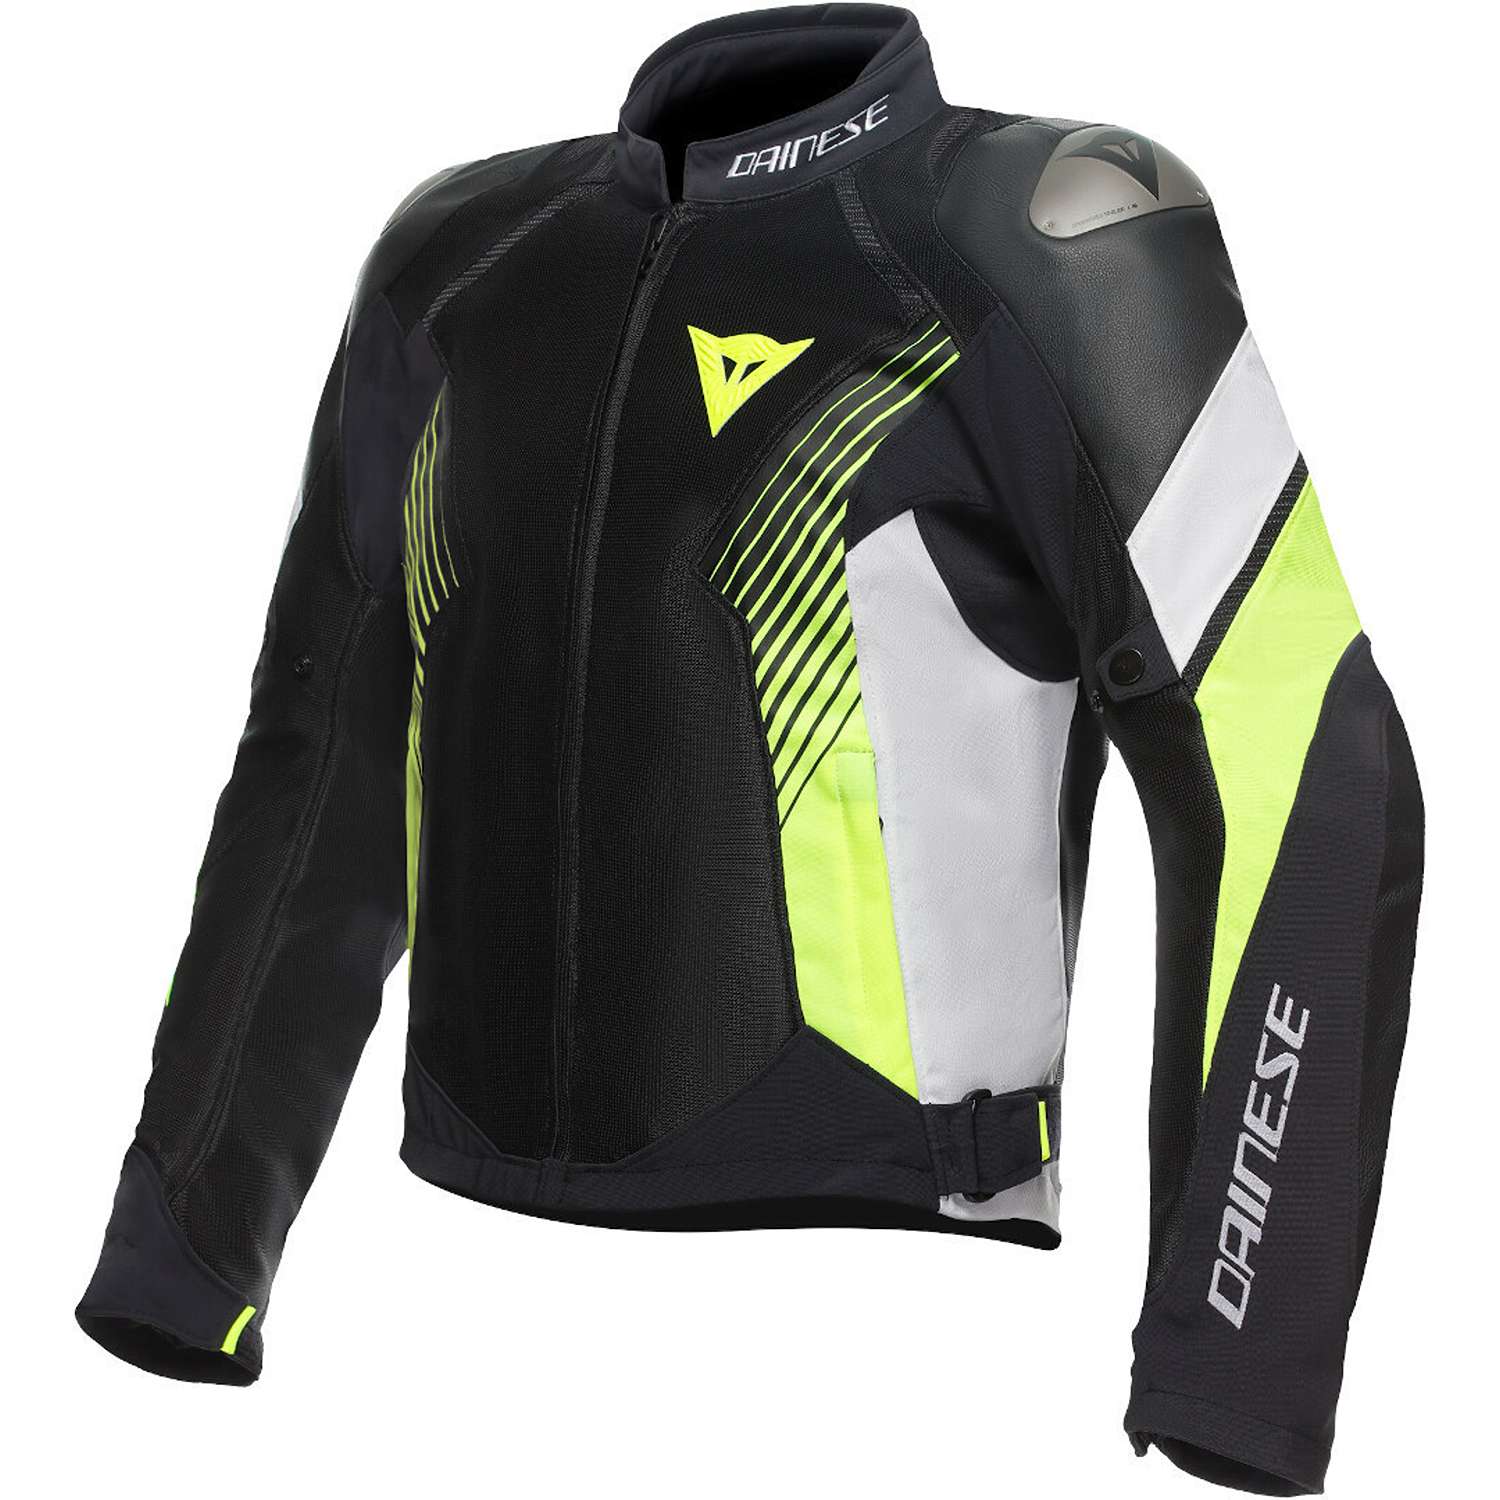 Image of Dainese Super Rider 2 Absoluteshell Jacket Black White Fluo Yellow Größe 58